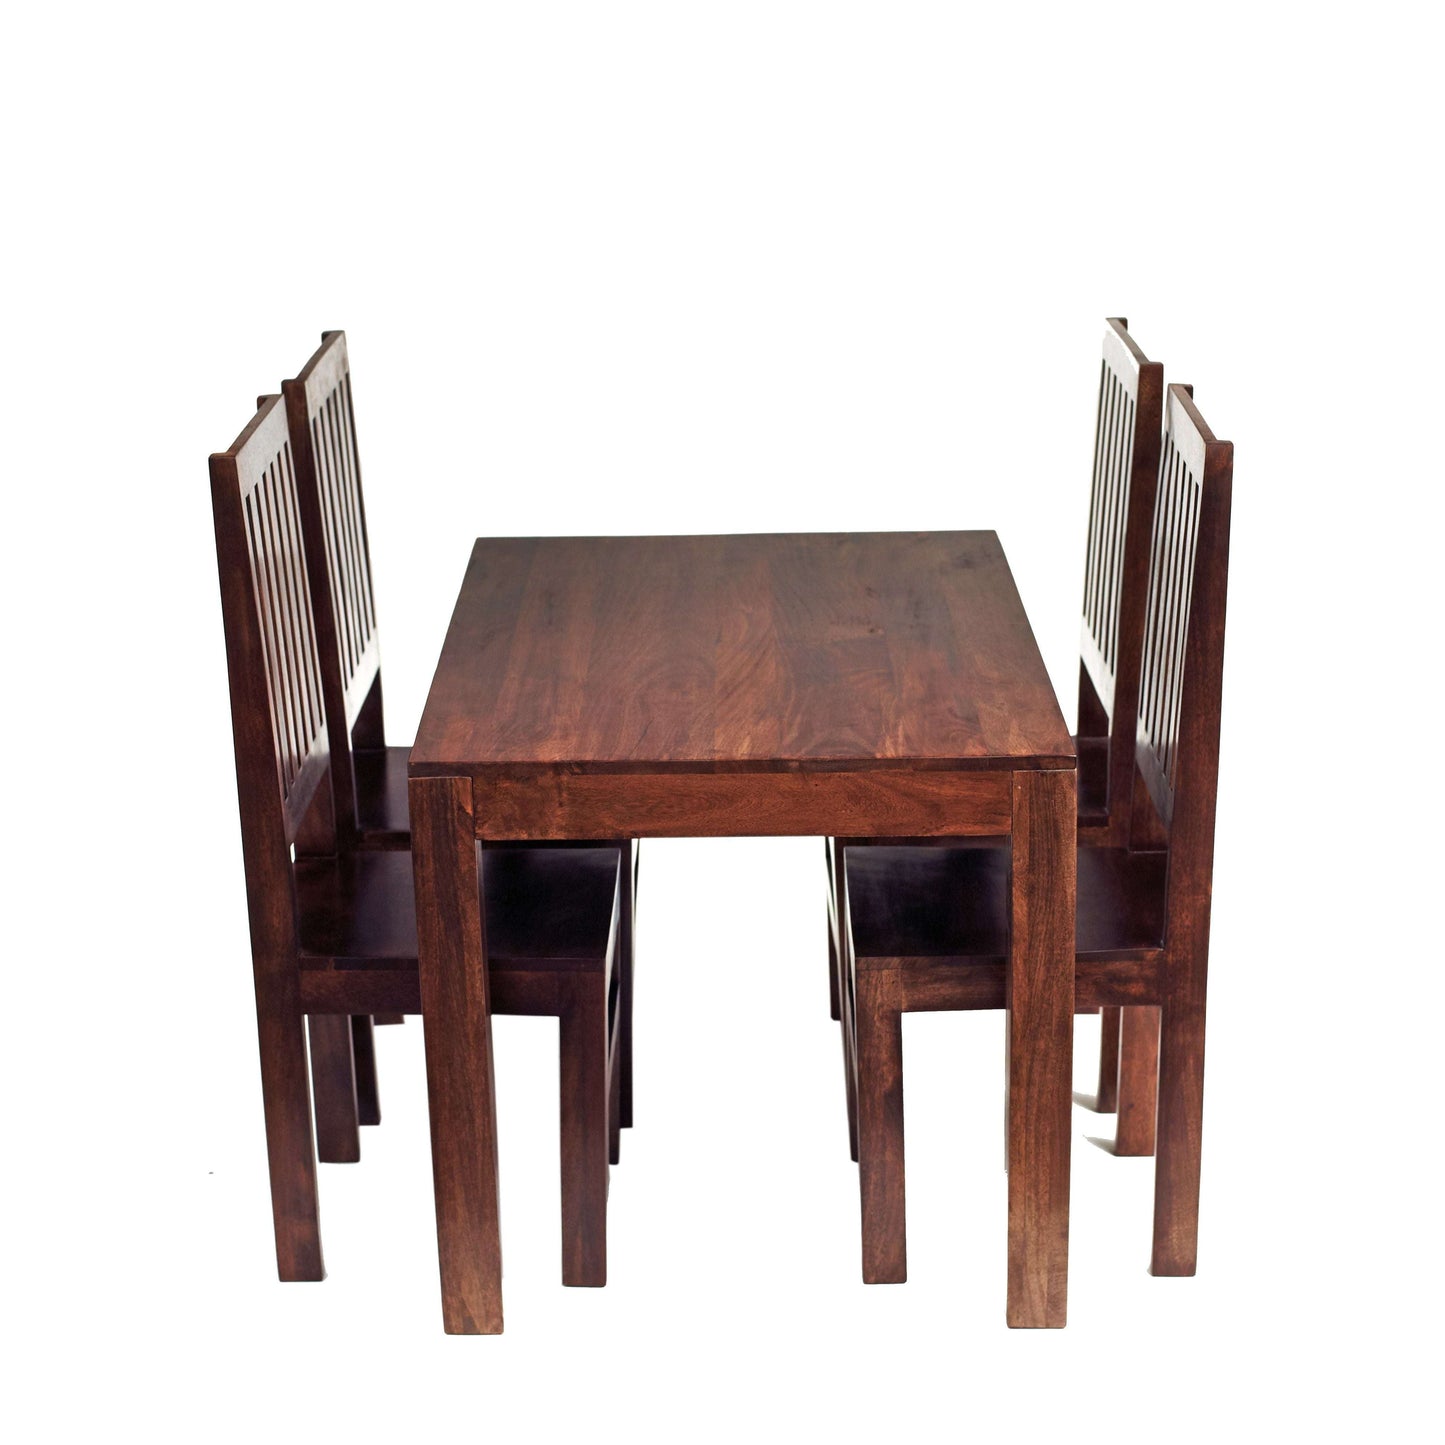 Toko Dark Mango 4Ft Dining Set With Wooden Chairs